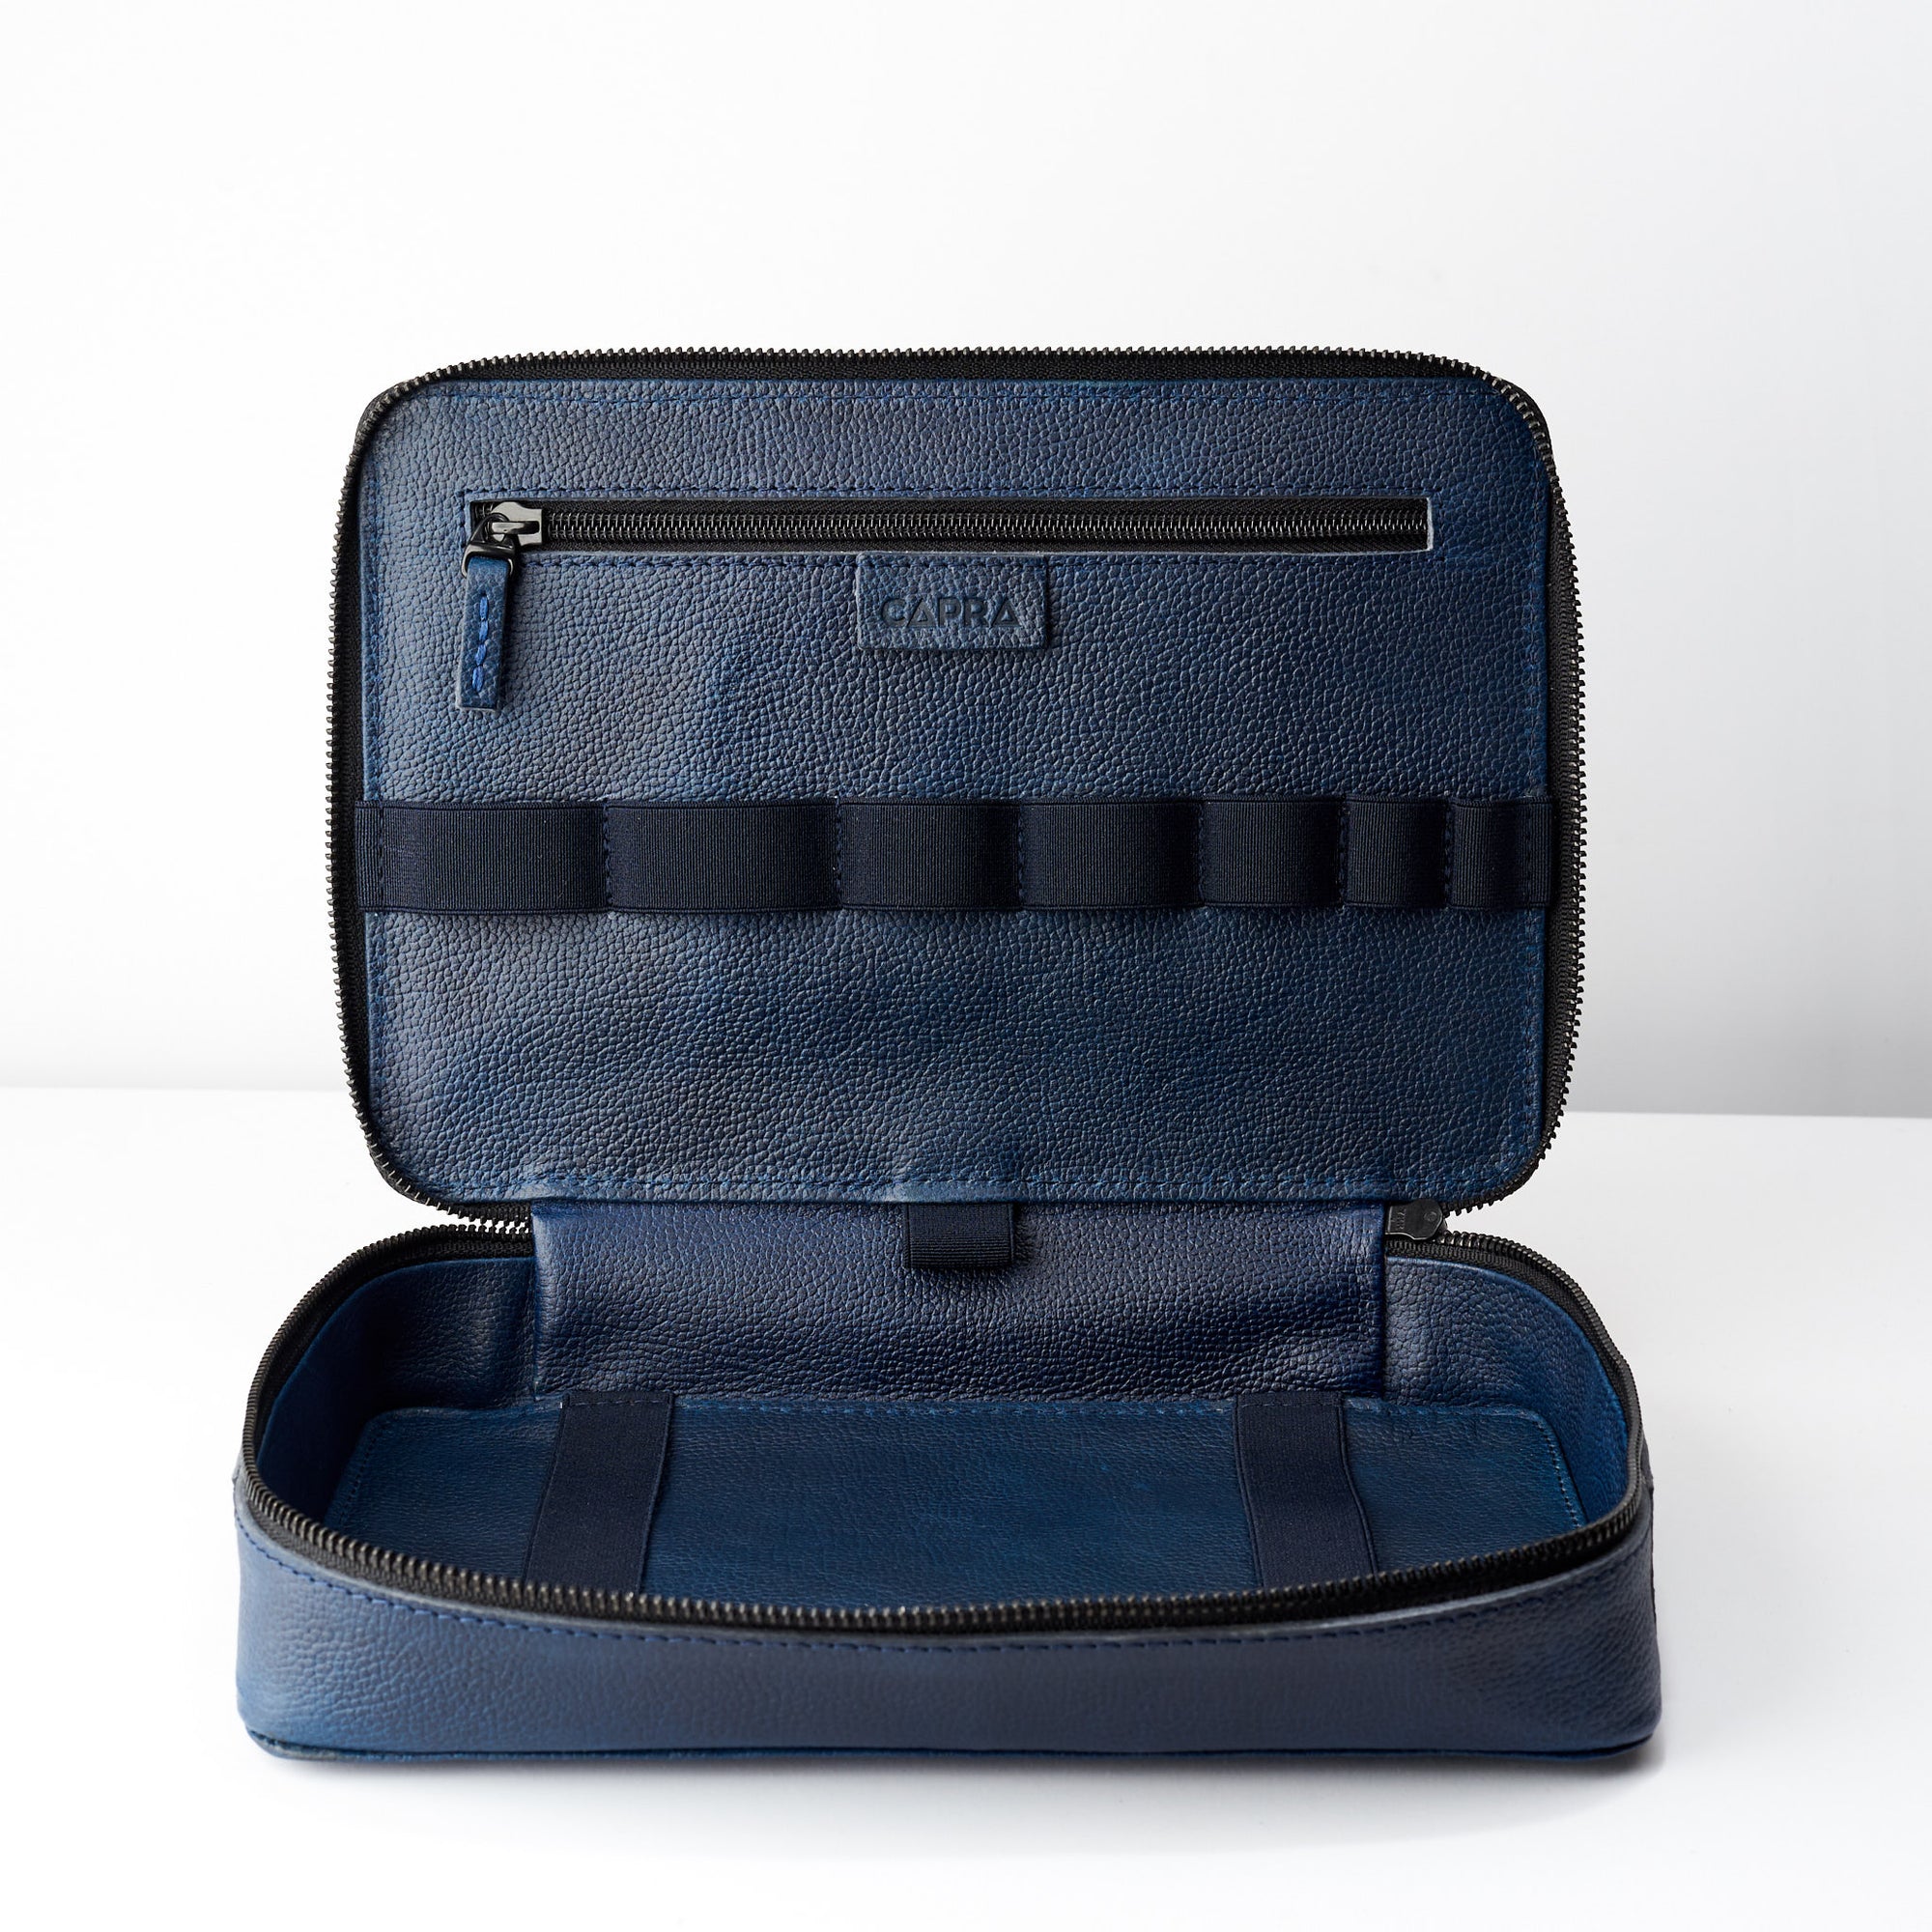 Tech essentials. Navy blue electronic organizer by Capra Leather